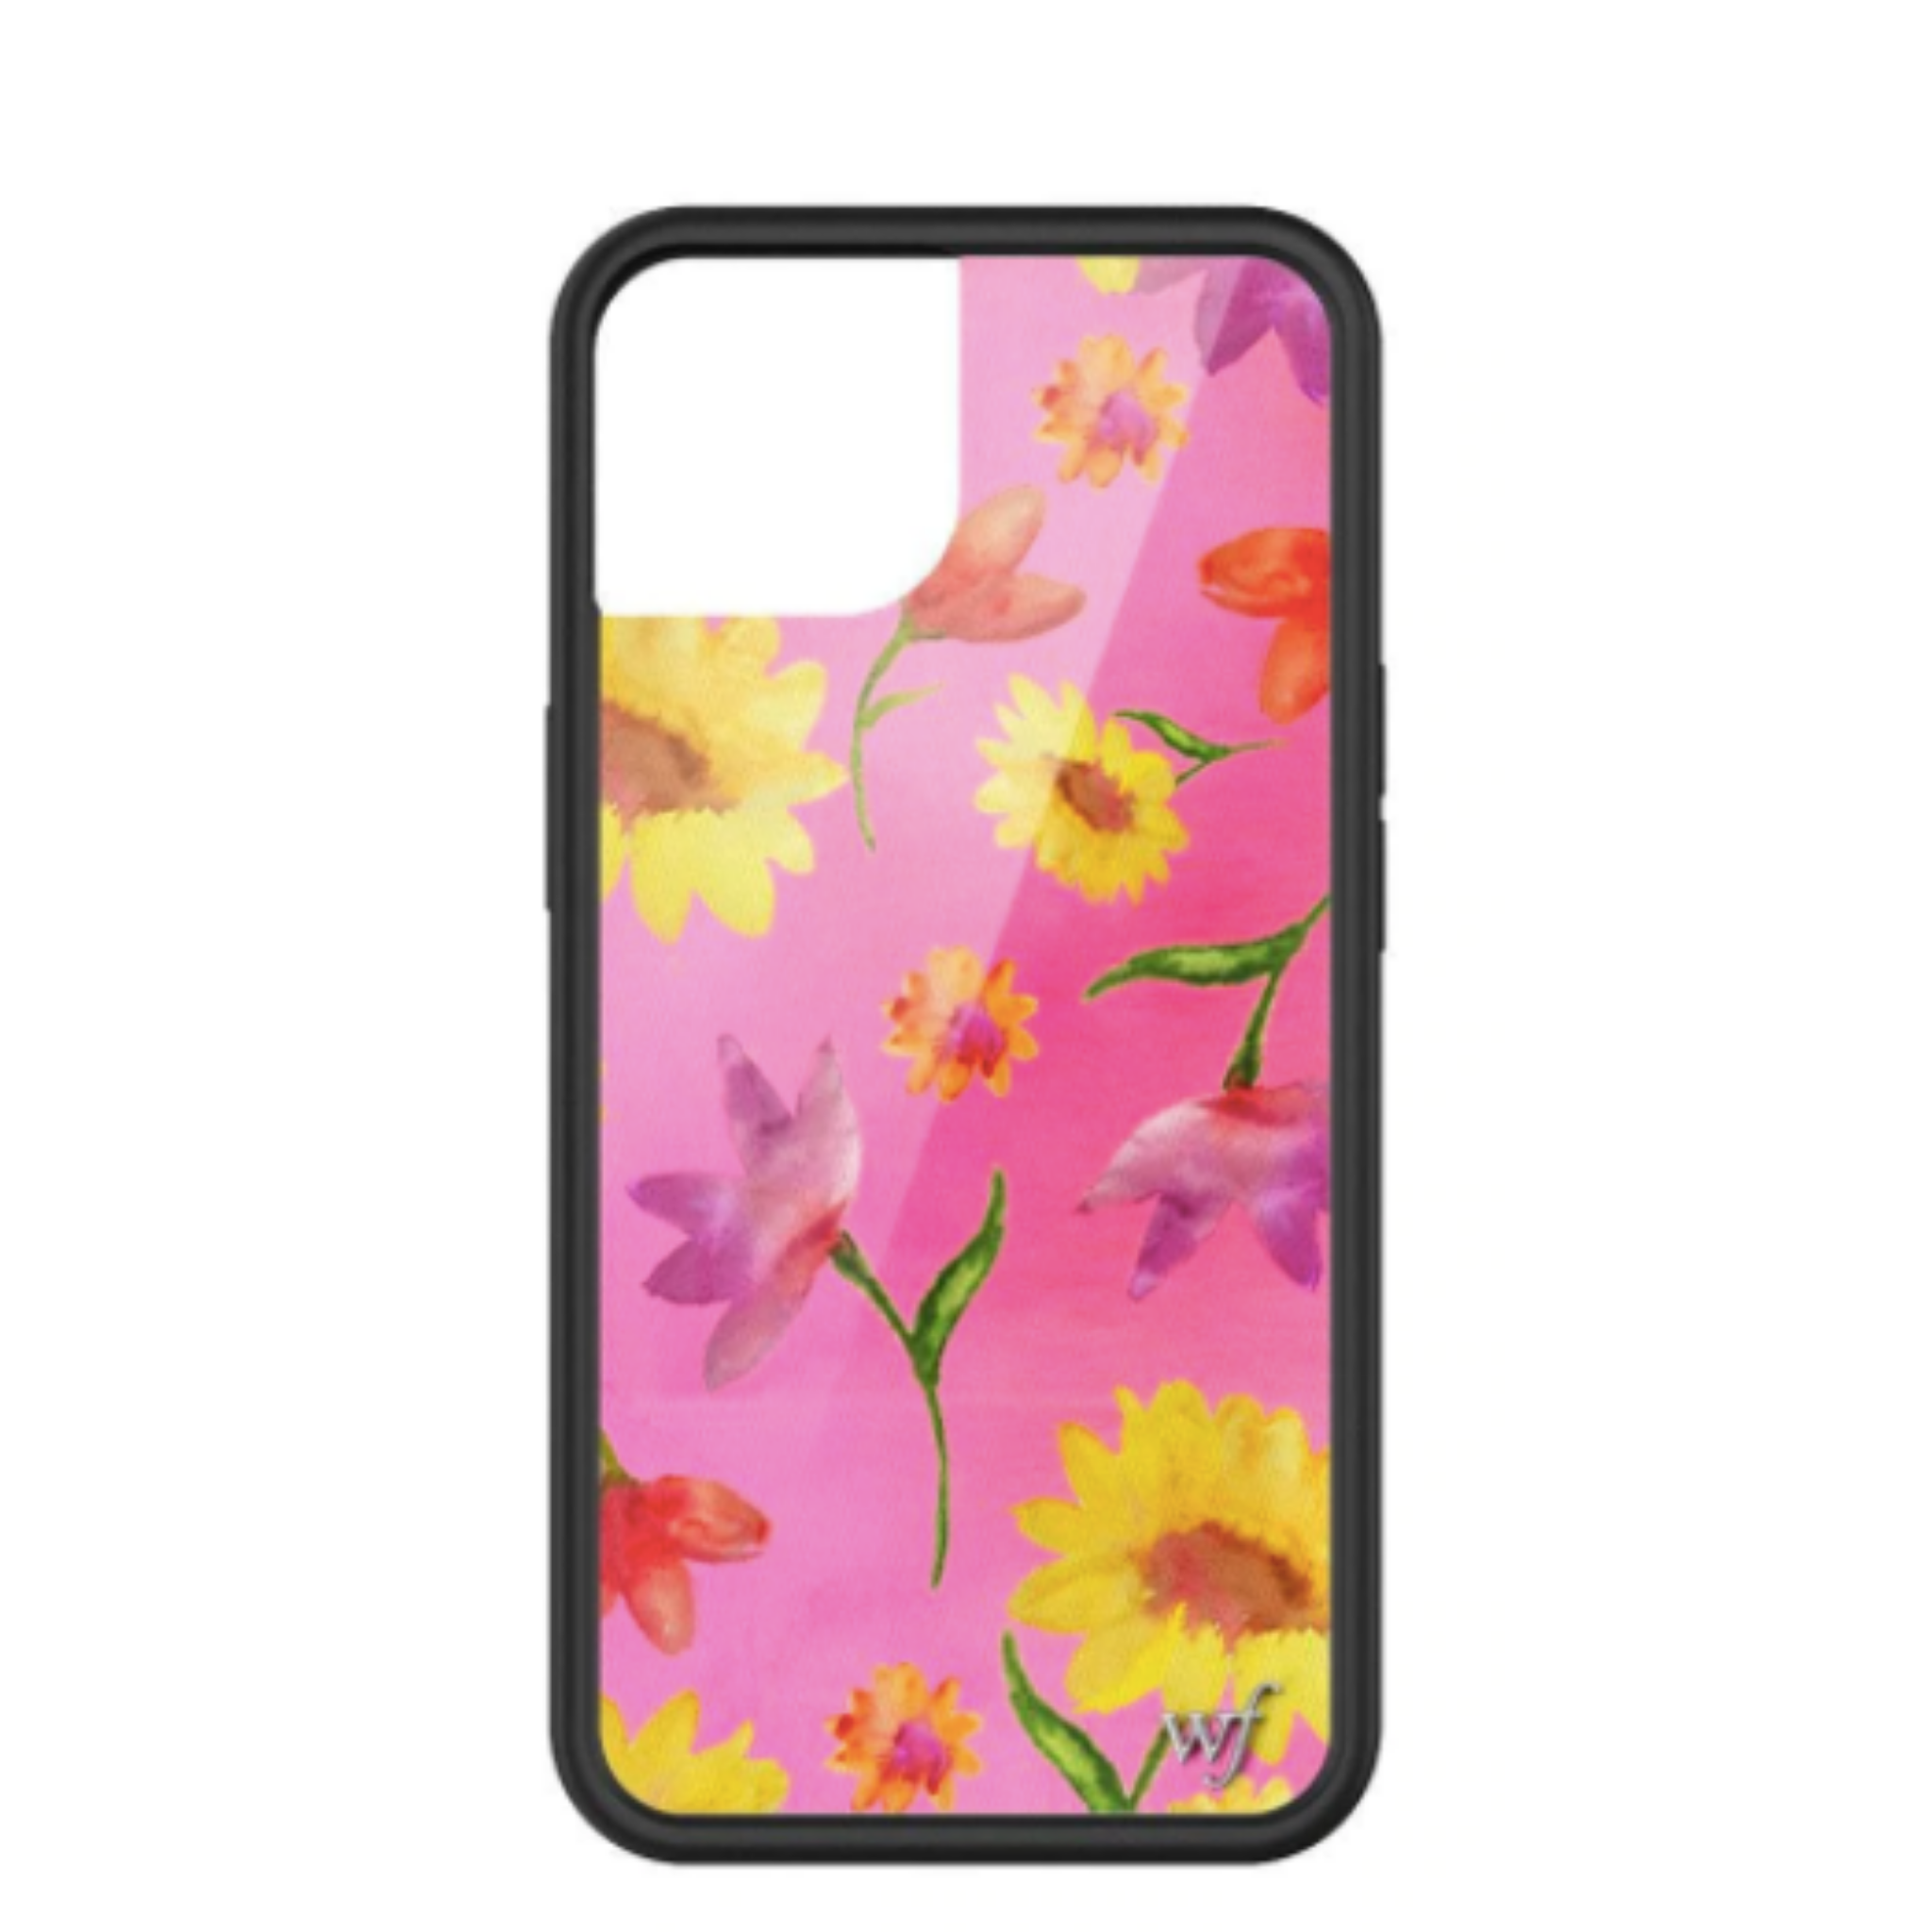 Sunflower Spring Floral iPhone case